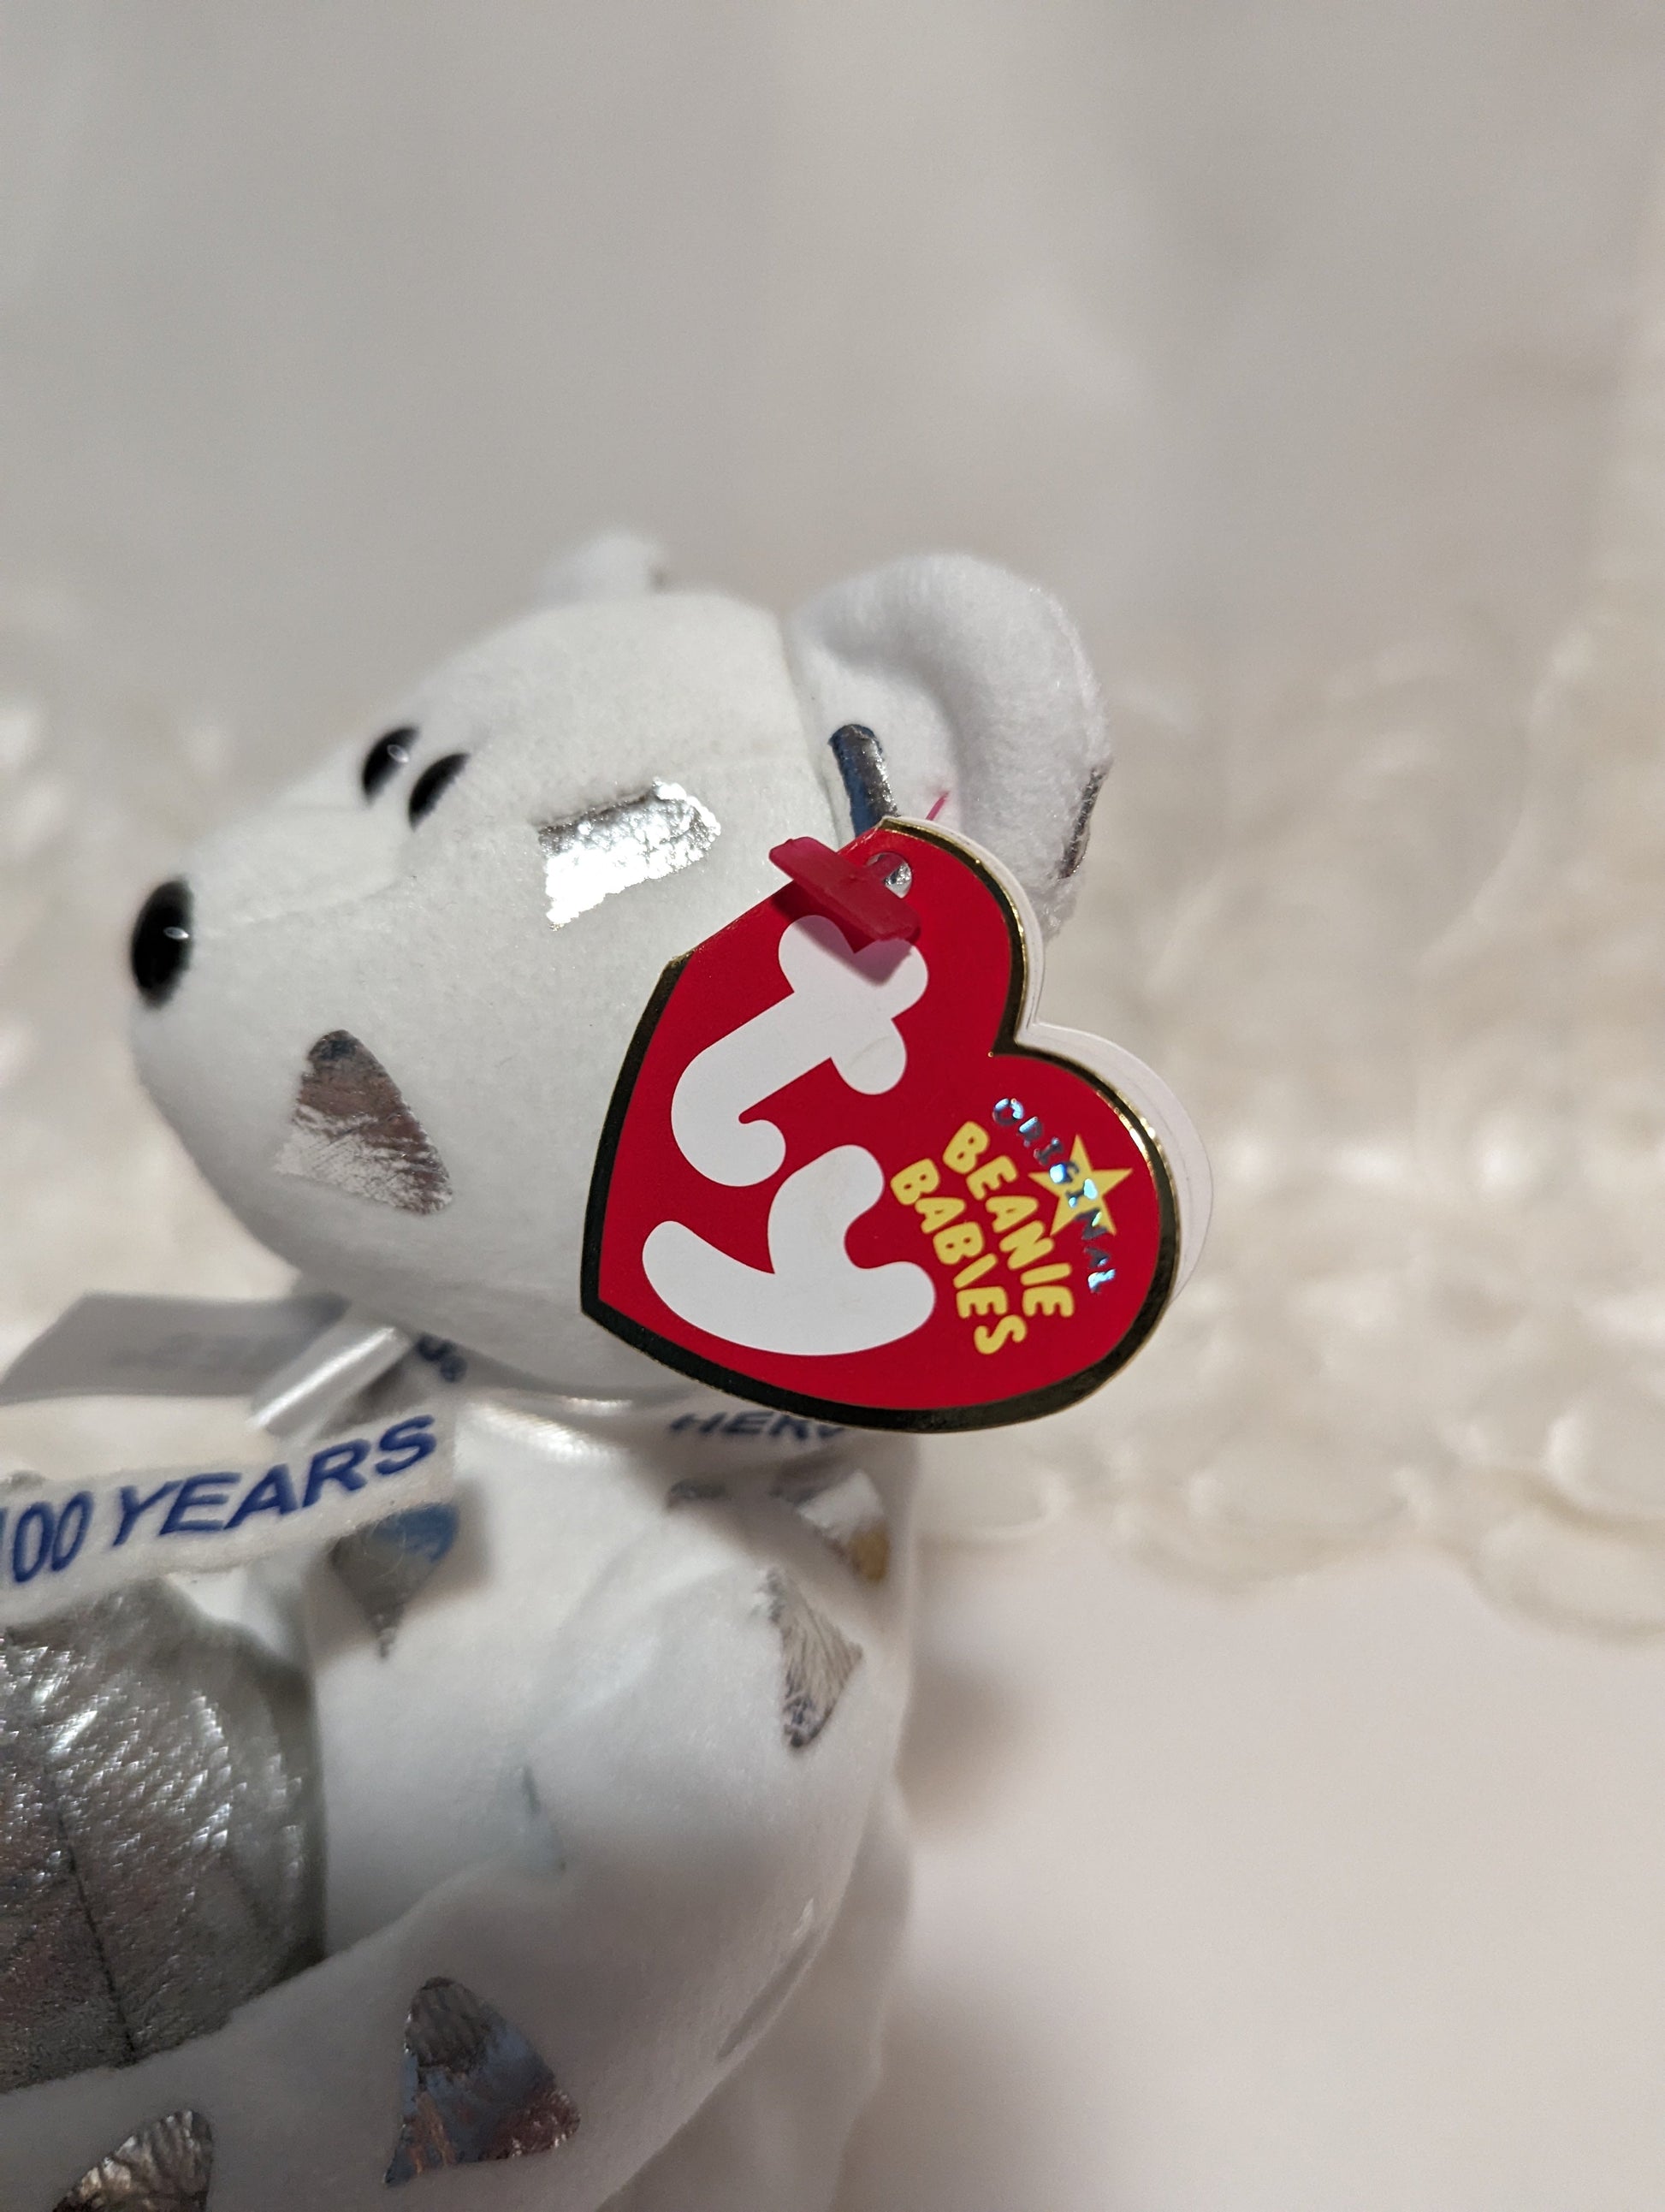 Ty Beanie Baby - Kisses the Hershey Bear - Walgreen’s Exclusive (8.5 inch) - Vintage Beanies Canada